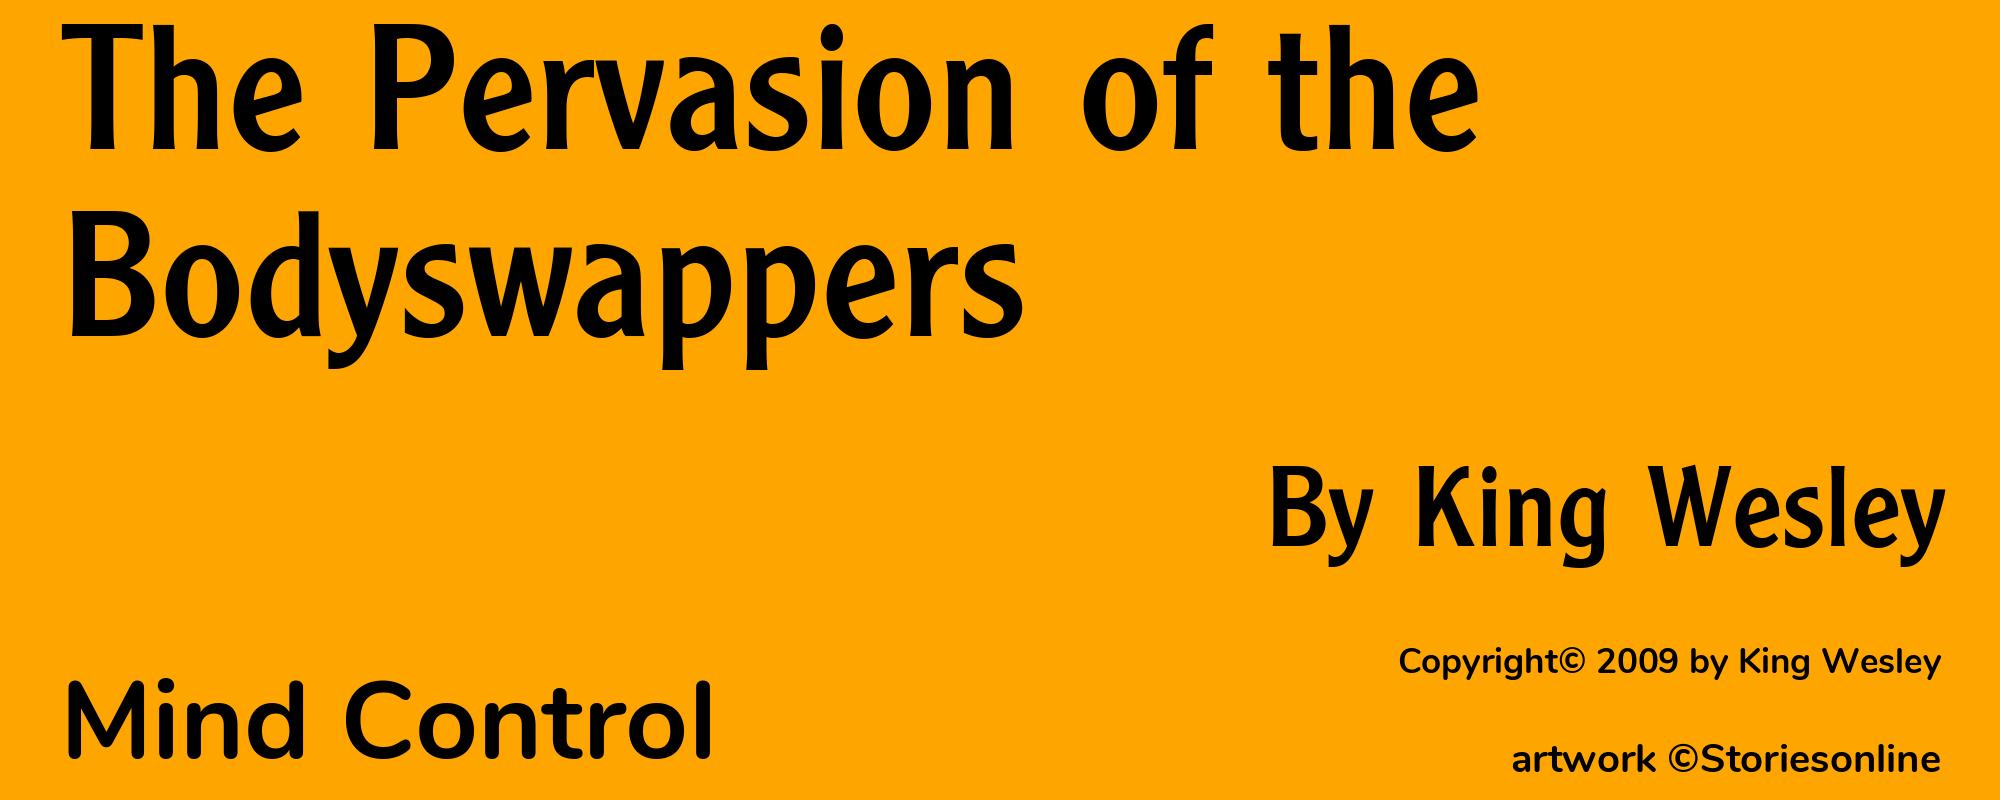 The Pervasion of the Bodyswappers - Cover